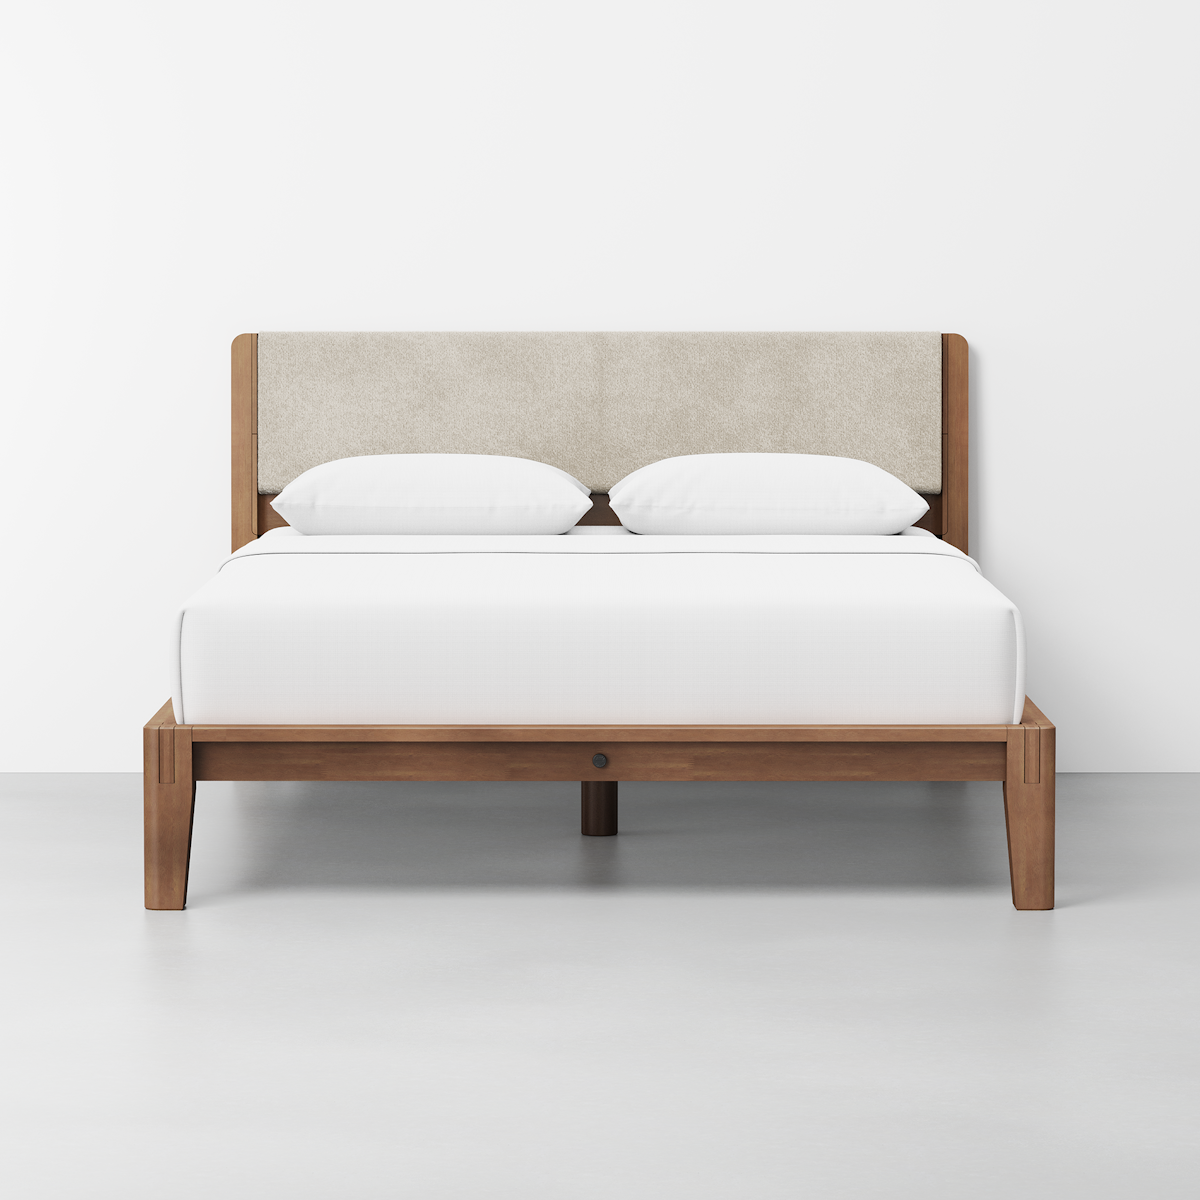 The Bed (Walnut / HB Cushion Cafe) - Render - Front